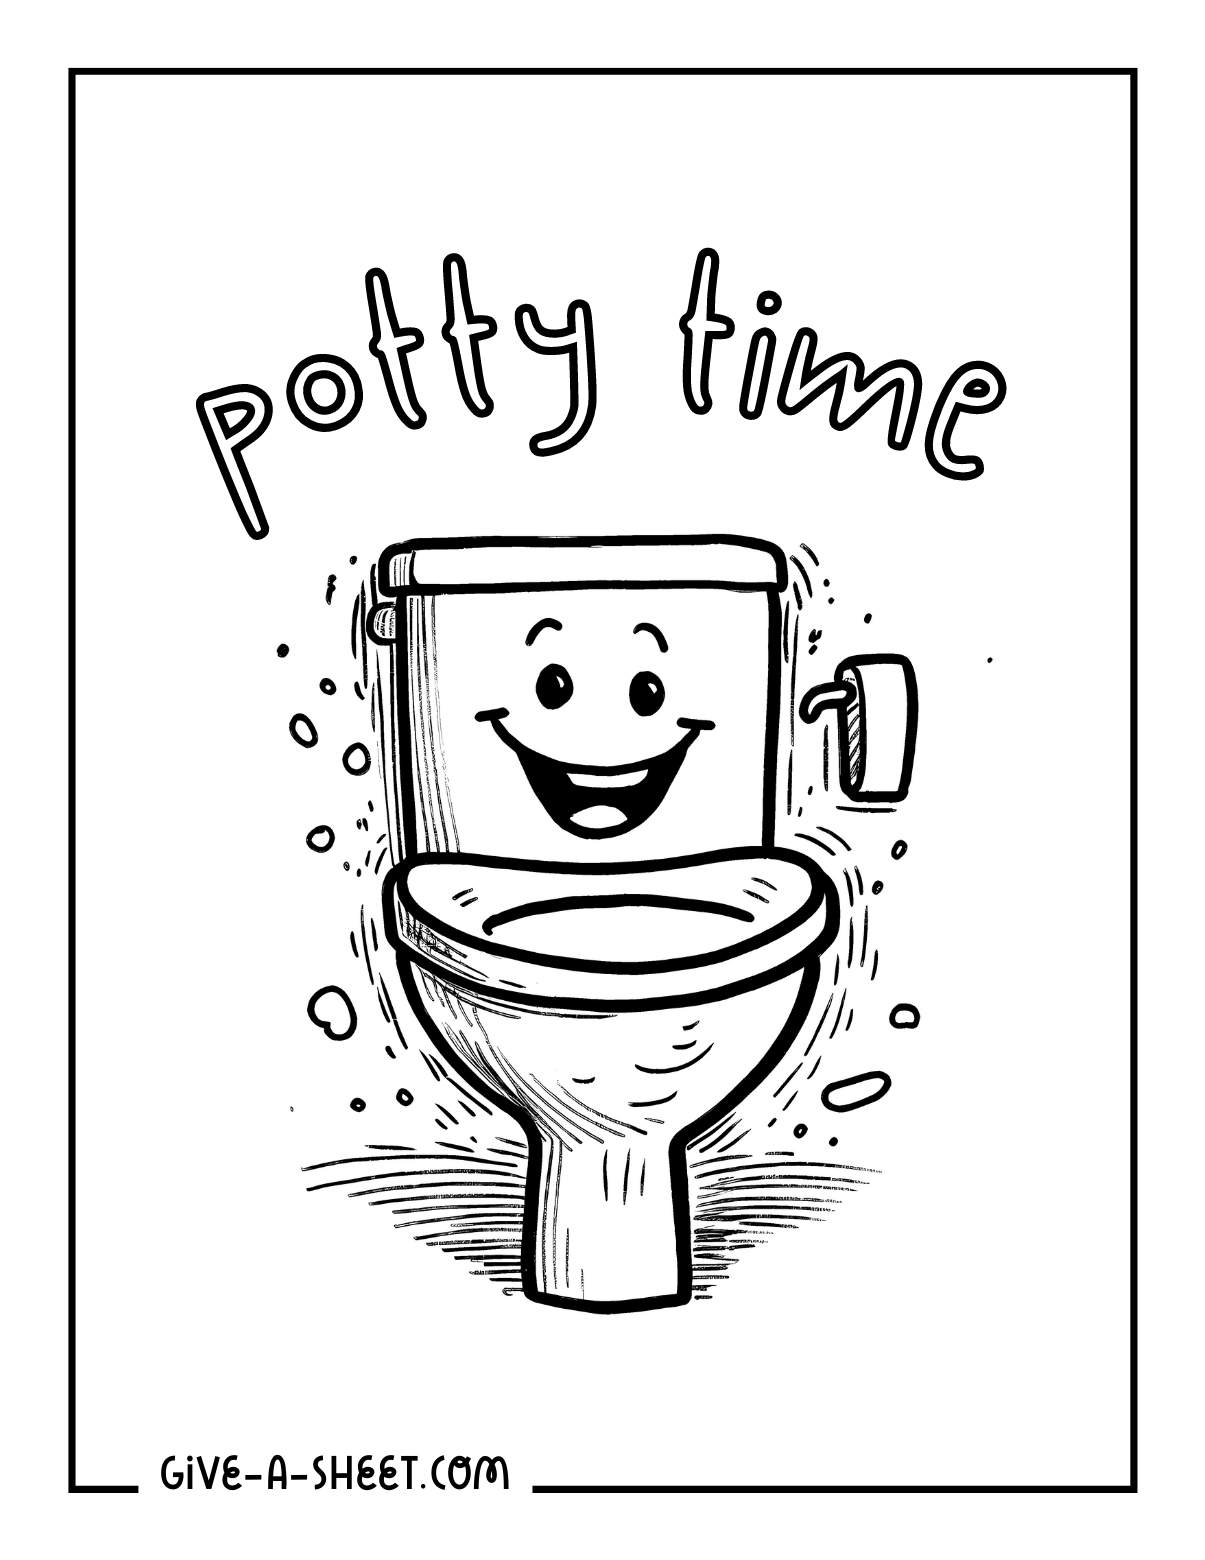 Potty chair coloring sheet for kids.